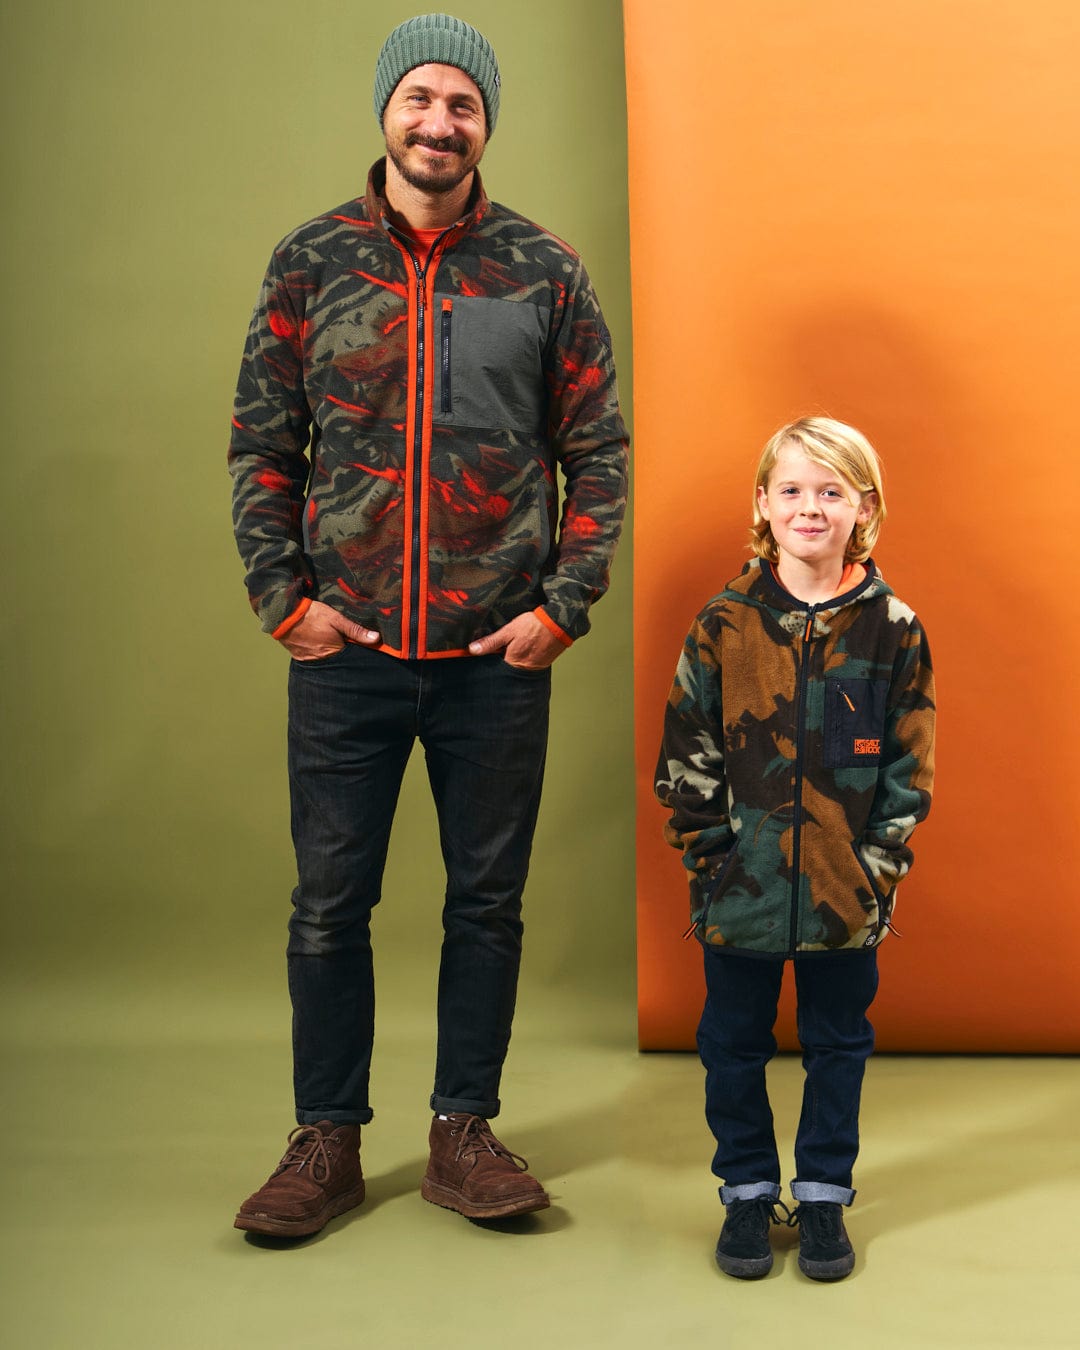 A man and a boy standing next to each other in front of Saltrock's Communicado - Kids Camo Zip Fleece - Dark Green jackets, ready for outdoor adventures.